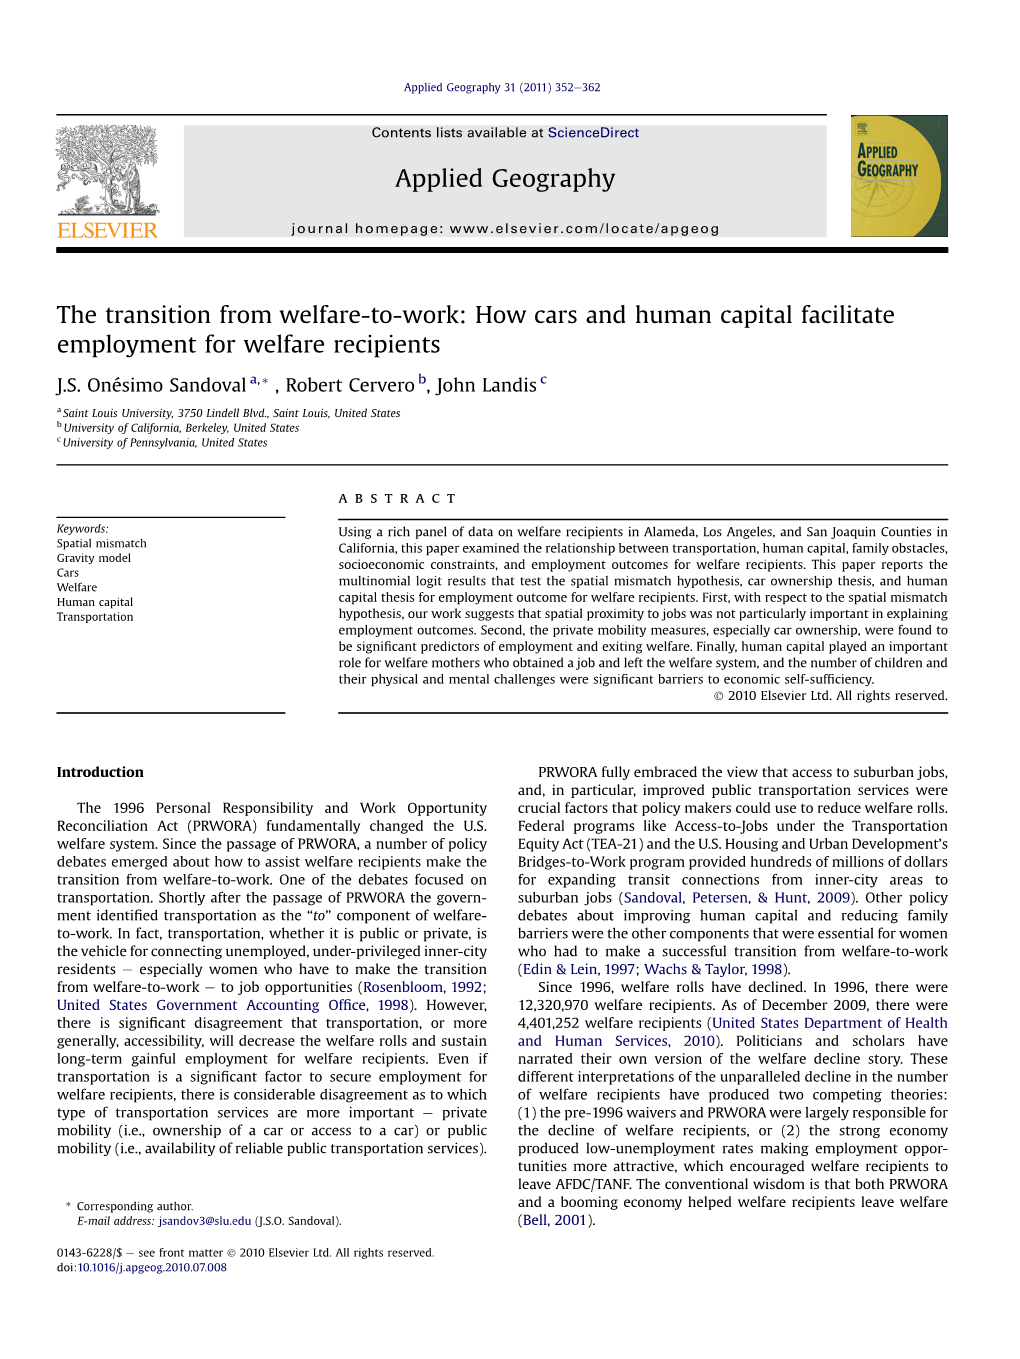 The Transition from Welfare-To-Work: How Cars and Human Capital Facilitate Employment for Welfare Recipients